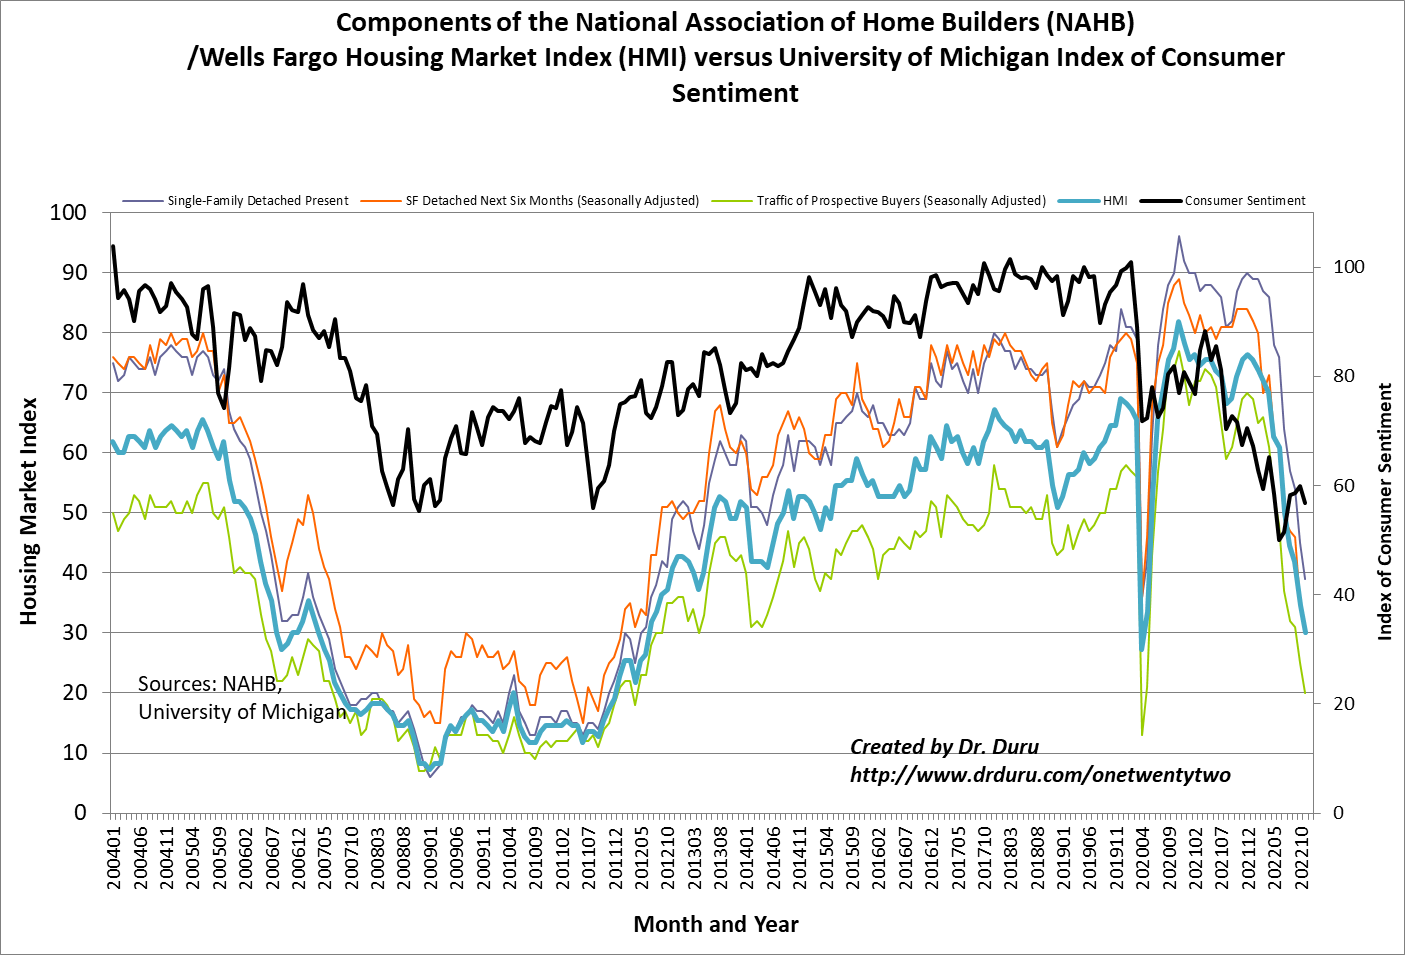 The components of the Housing Market Index (HMI) are continuing a race to return to their pandemic lows...and beyond?